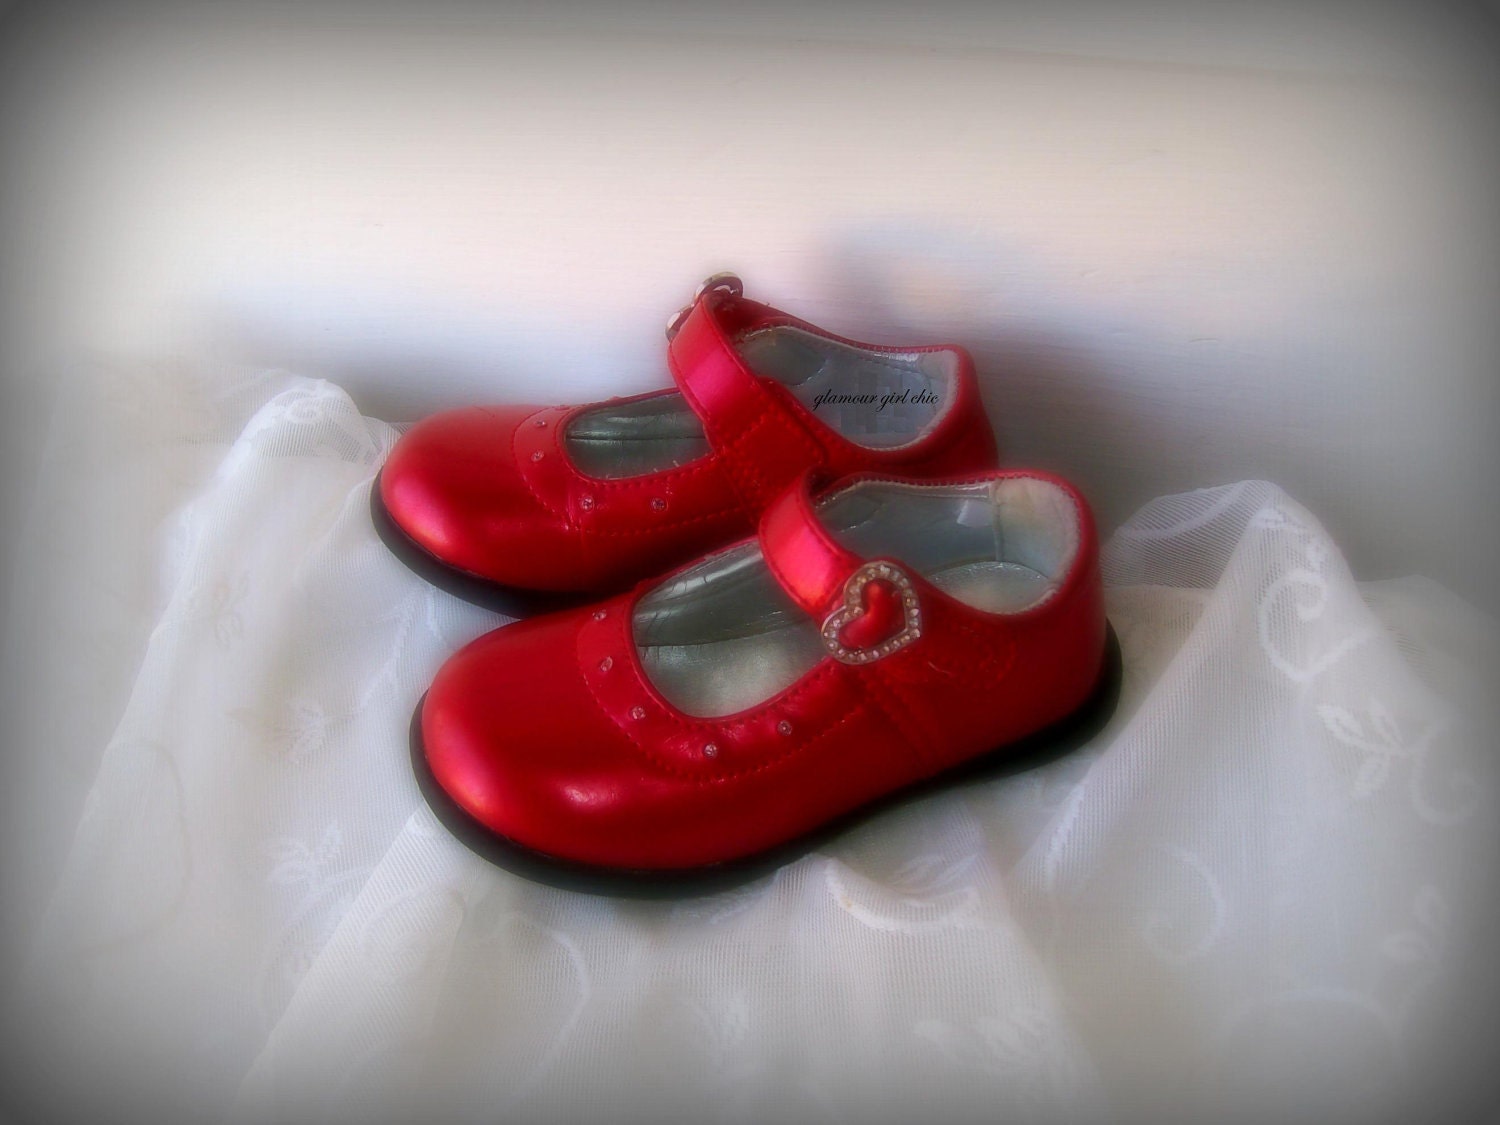 Future Cinderella.Girls Red shoes. MAry Jane shoes.Girly Fairy tale. Nursery Wall Art.Girls room. 5x7 Photography